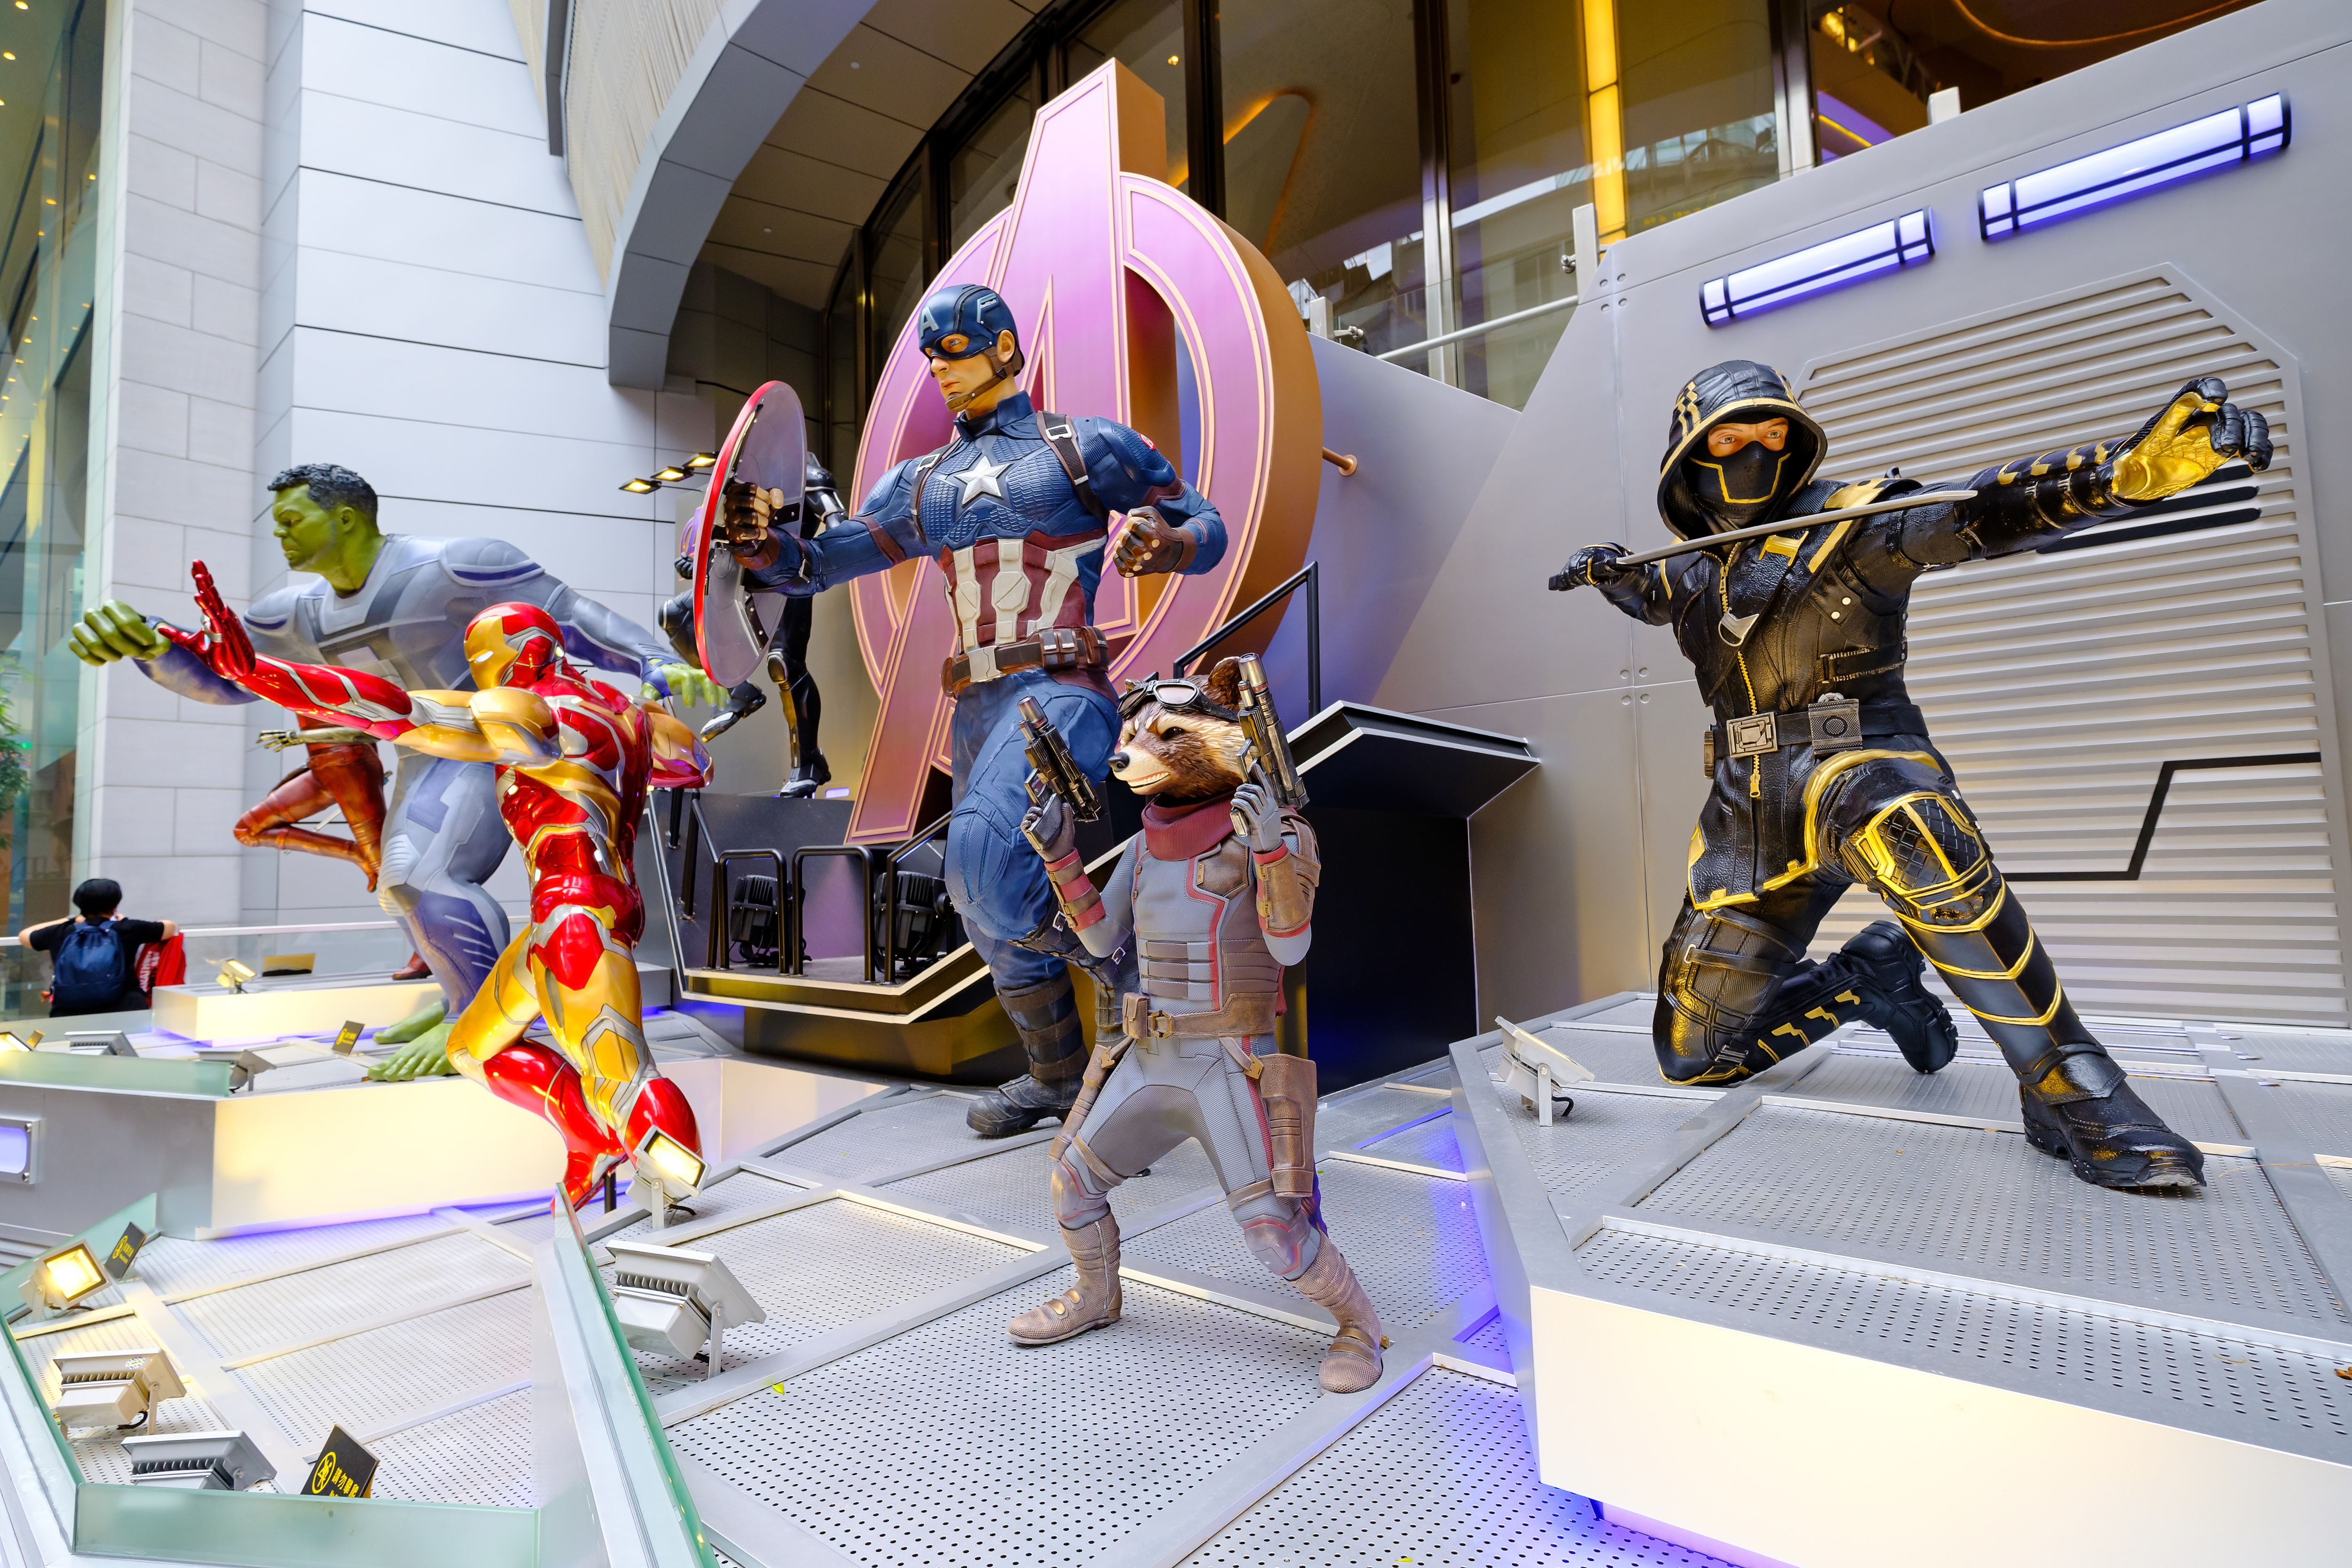 Iron man, Rocket Raccoon, Hulk, Hawkeye and Captain America are fictional characters seen appearing in American comic books published by Marvel Comics. Avengers 4: Endgame” character model features 1:1 life-size statues in Hong Kong, as part of promotional activity before the movie release.